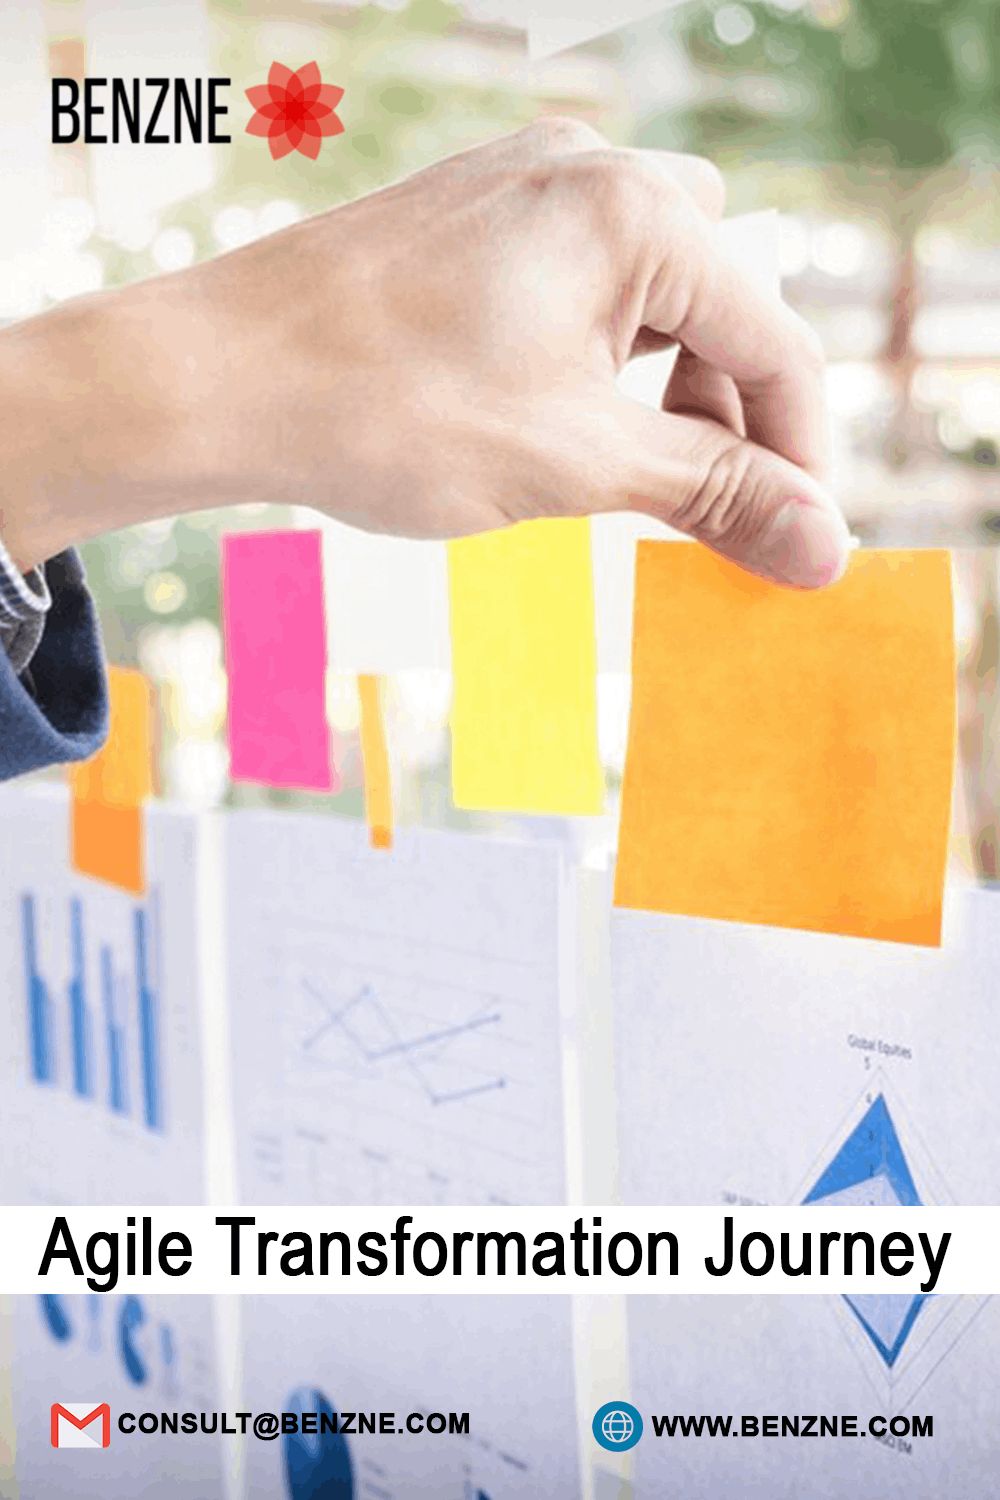 Benzne Agile Transformation Journey To Implement The Successful Strategy Without Any Hassle